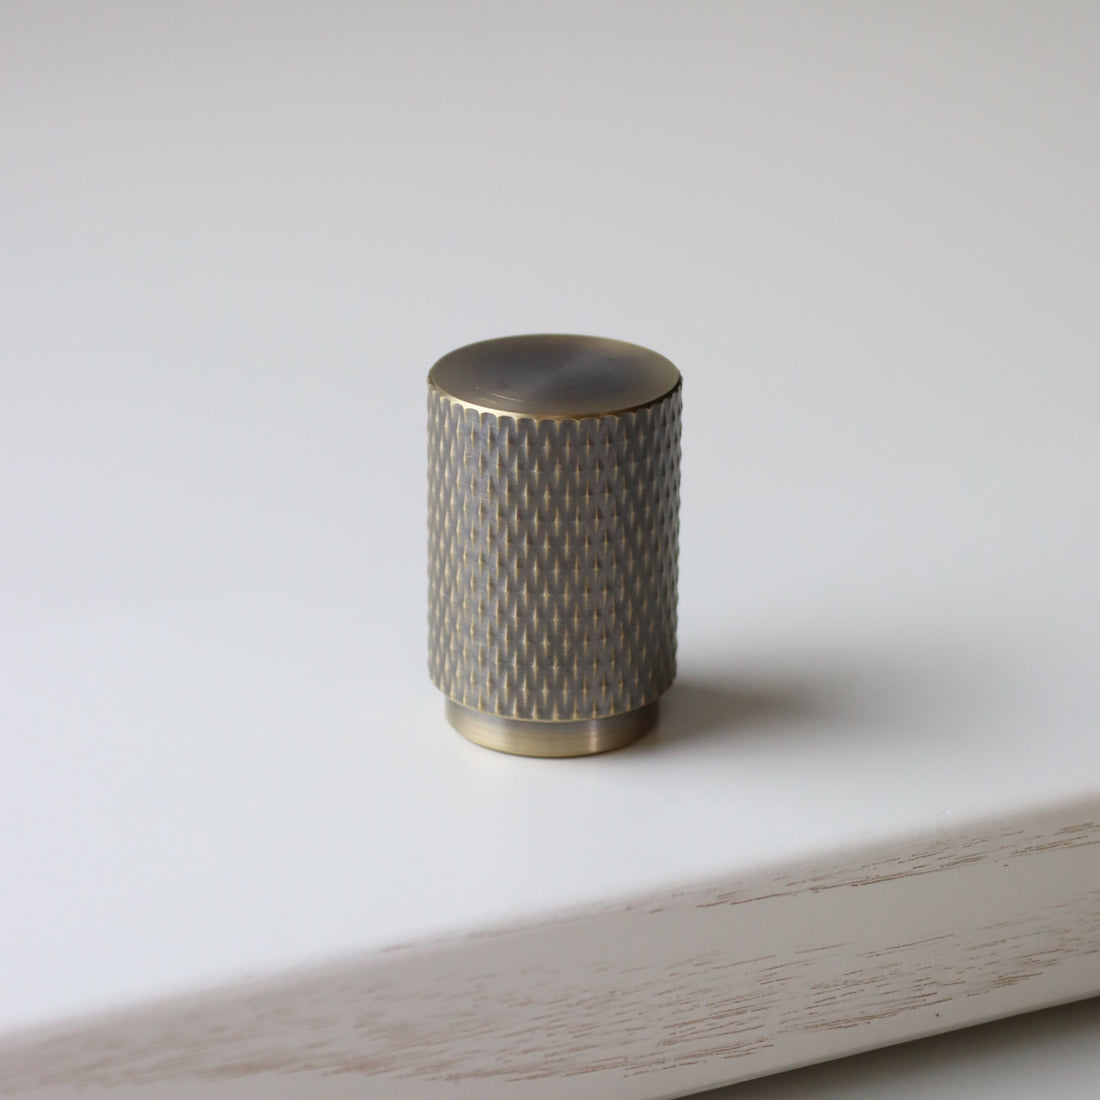 Ives pull knob in antique bronze - knurled knob for traditional cabinetry 